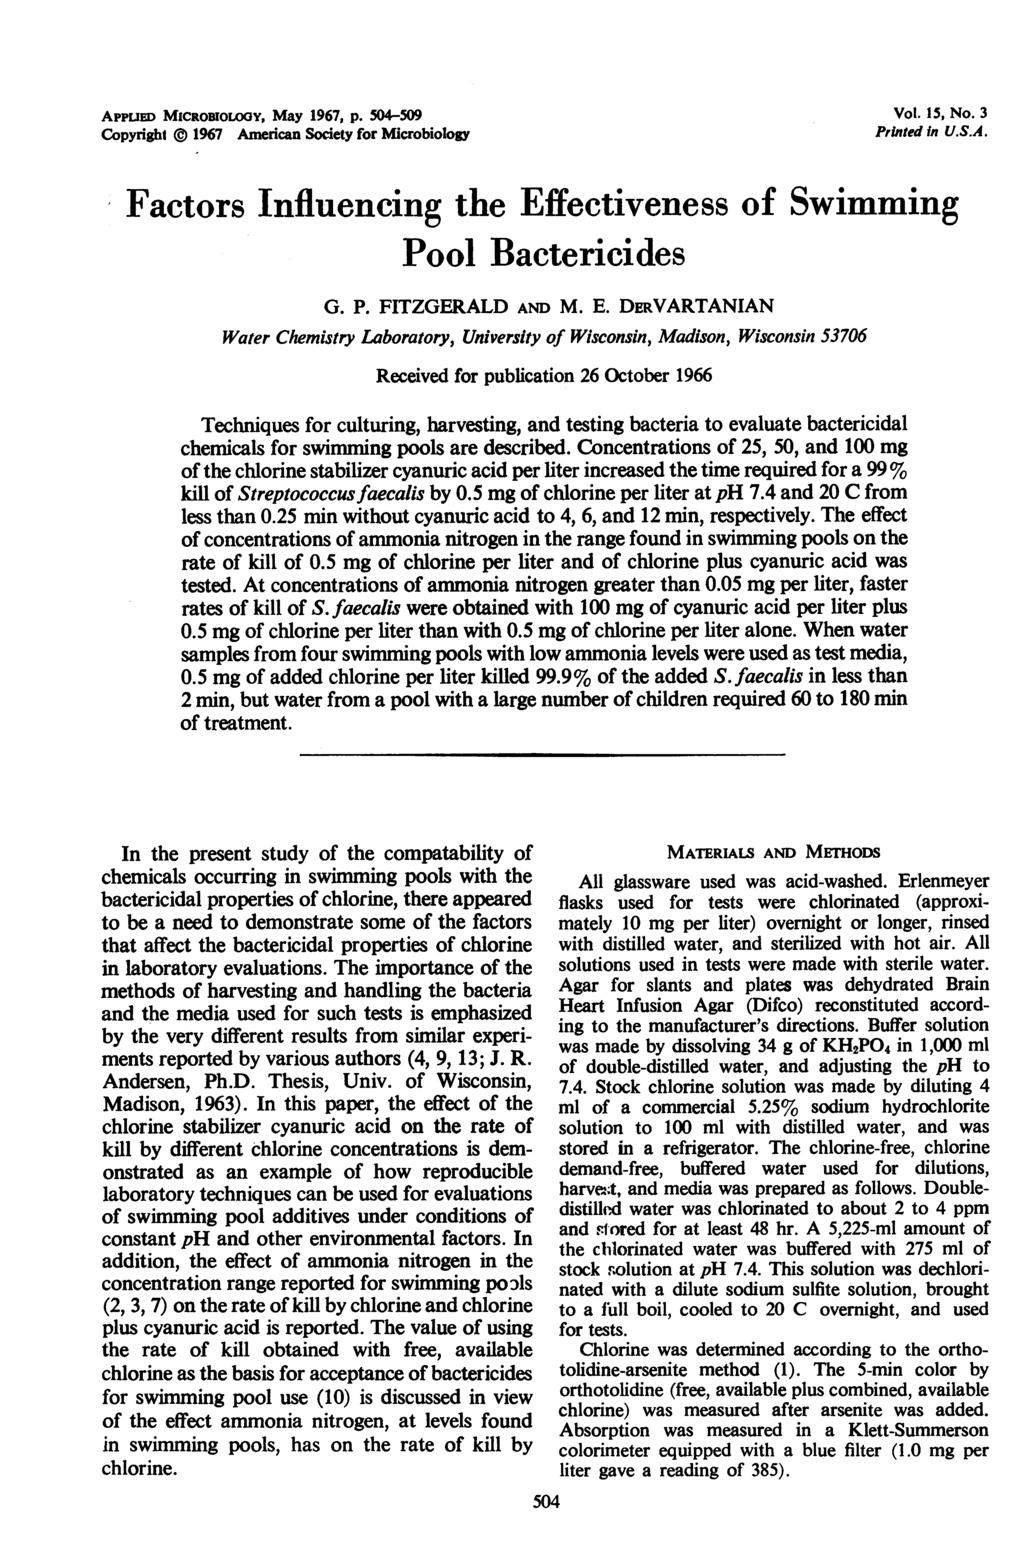 AppuED MICROBIOLOGY, May 1967, p. 54-59 Vol. 15, No. 3 Copyright 1967 American Society for Microbiology Printed In U.S.A. Factors Influencing the Effectiveness of Simming Pool Bactericides G. P. FITZGERALD AND M.